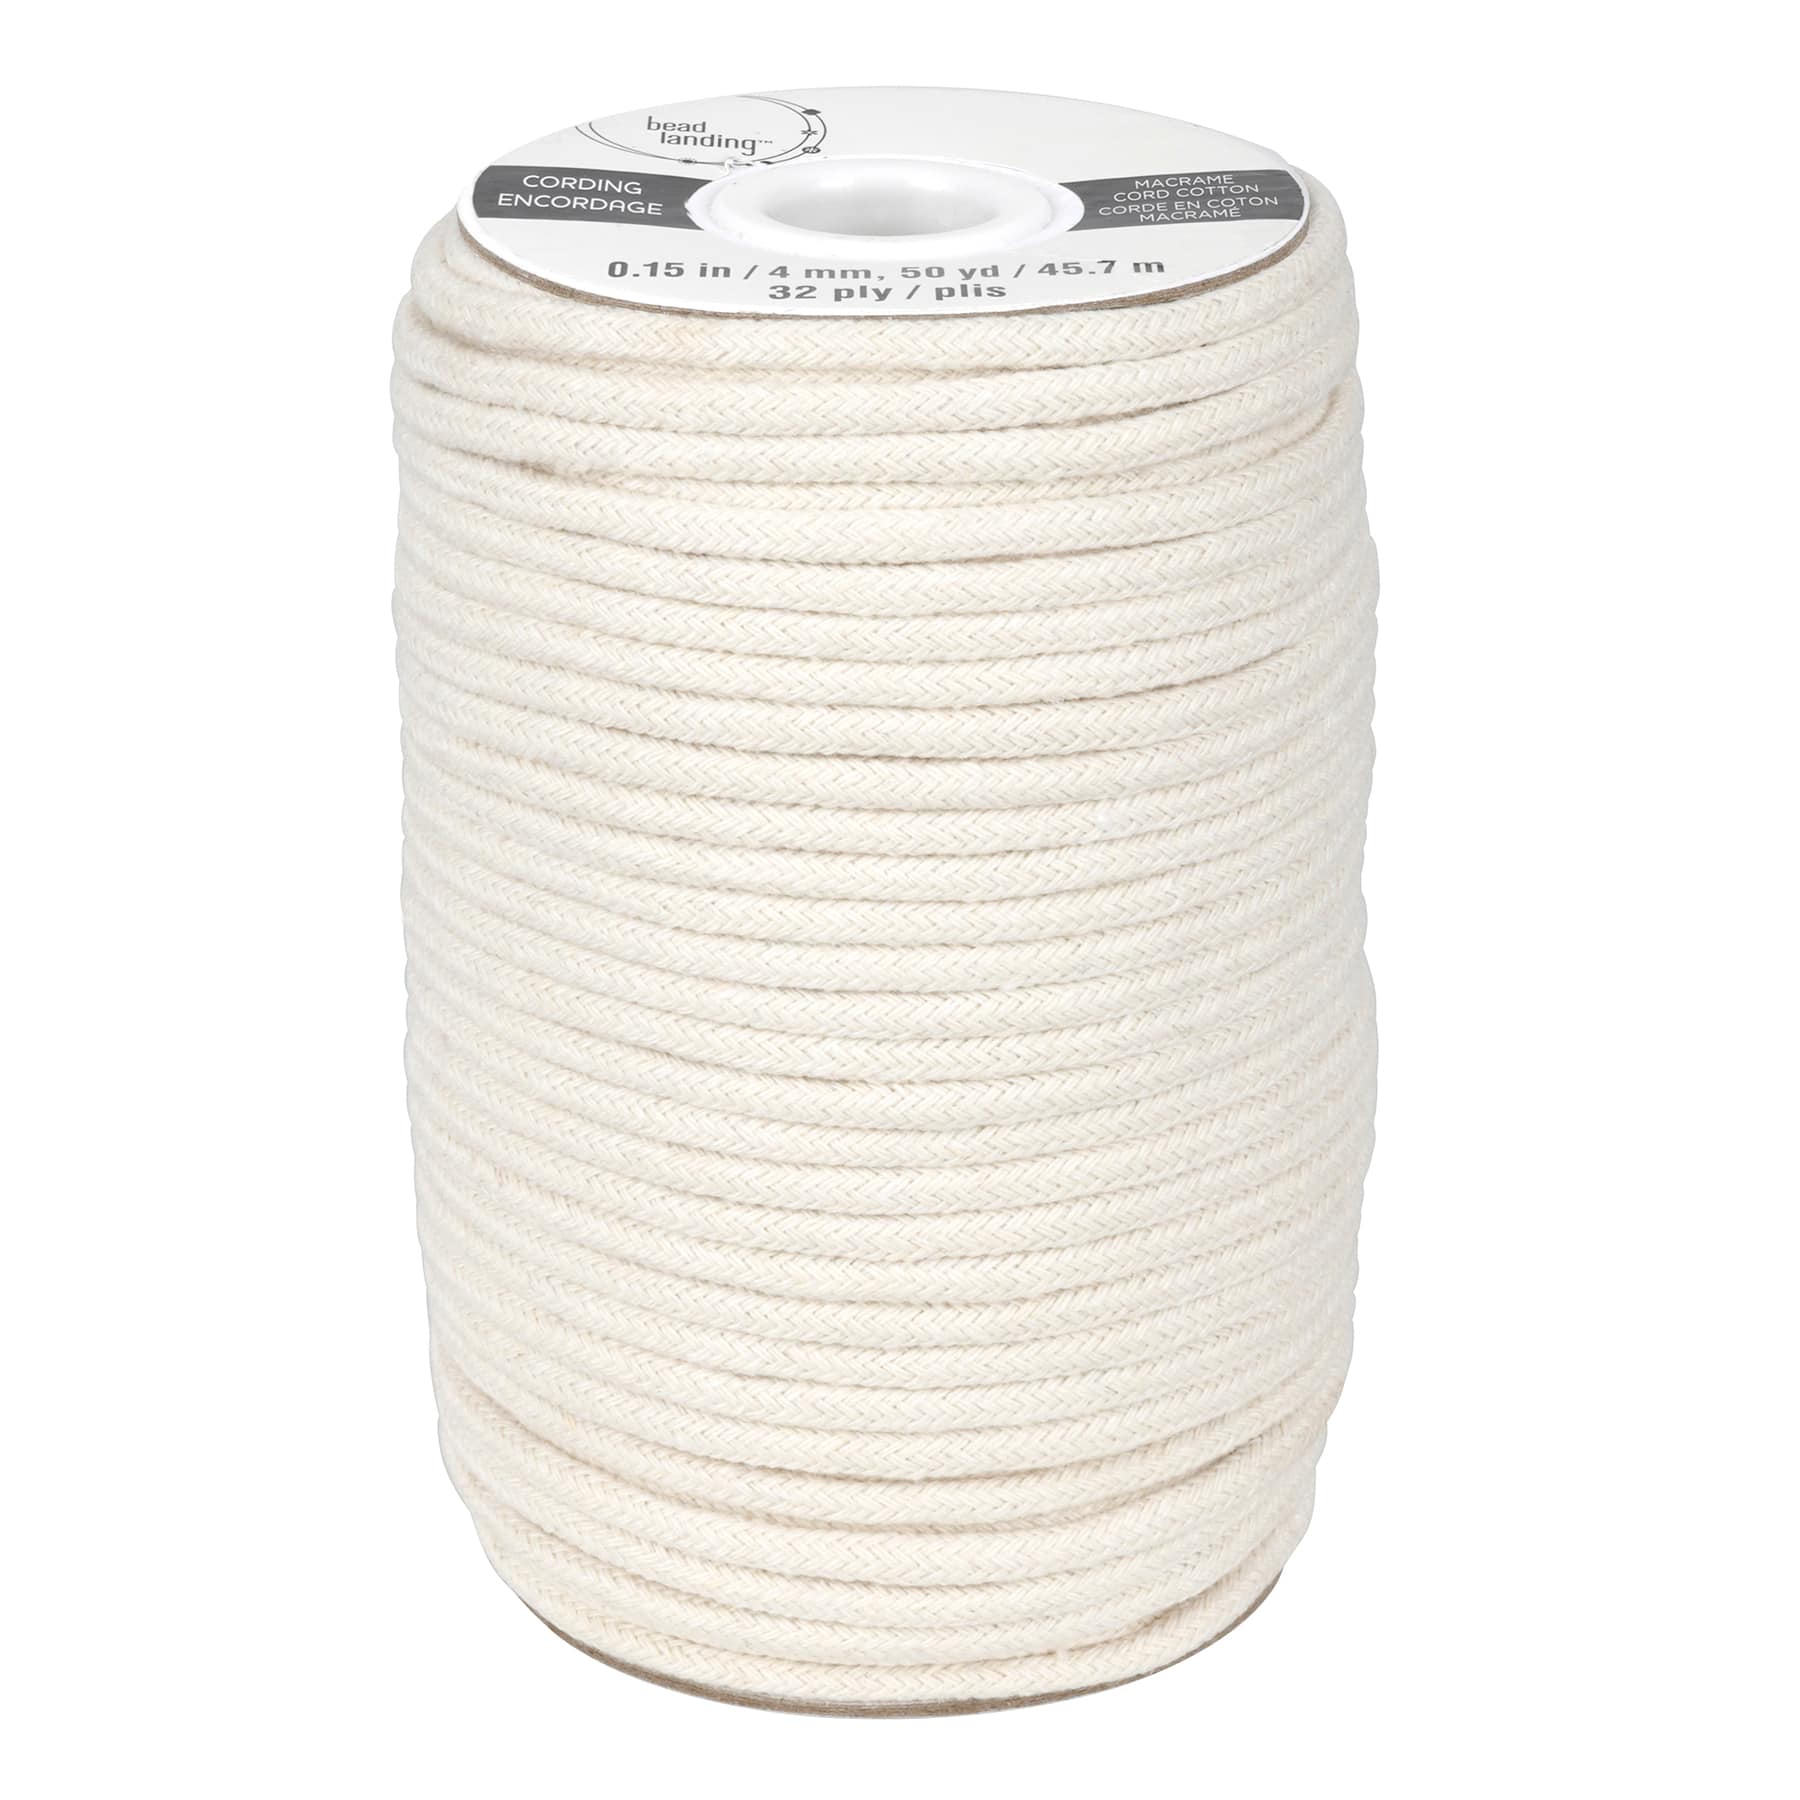 Darice Macrame Cord 32-Ply 3mmX50yd-Natural Cotton